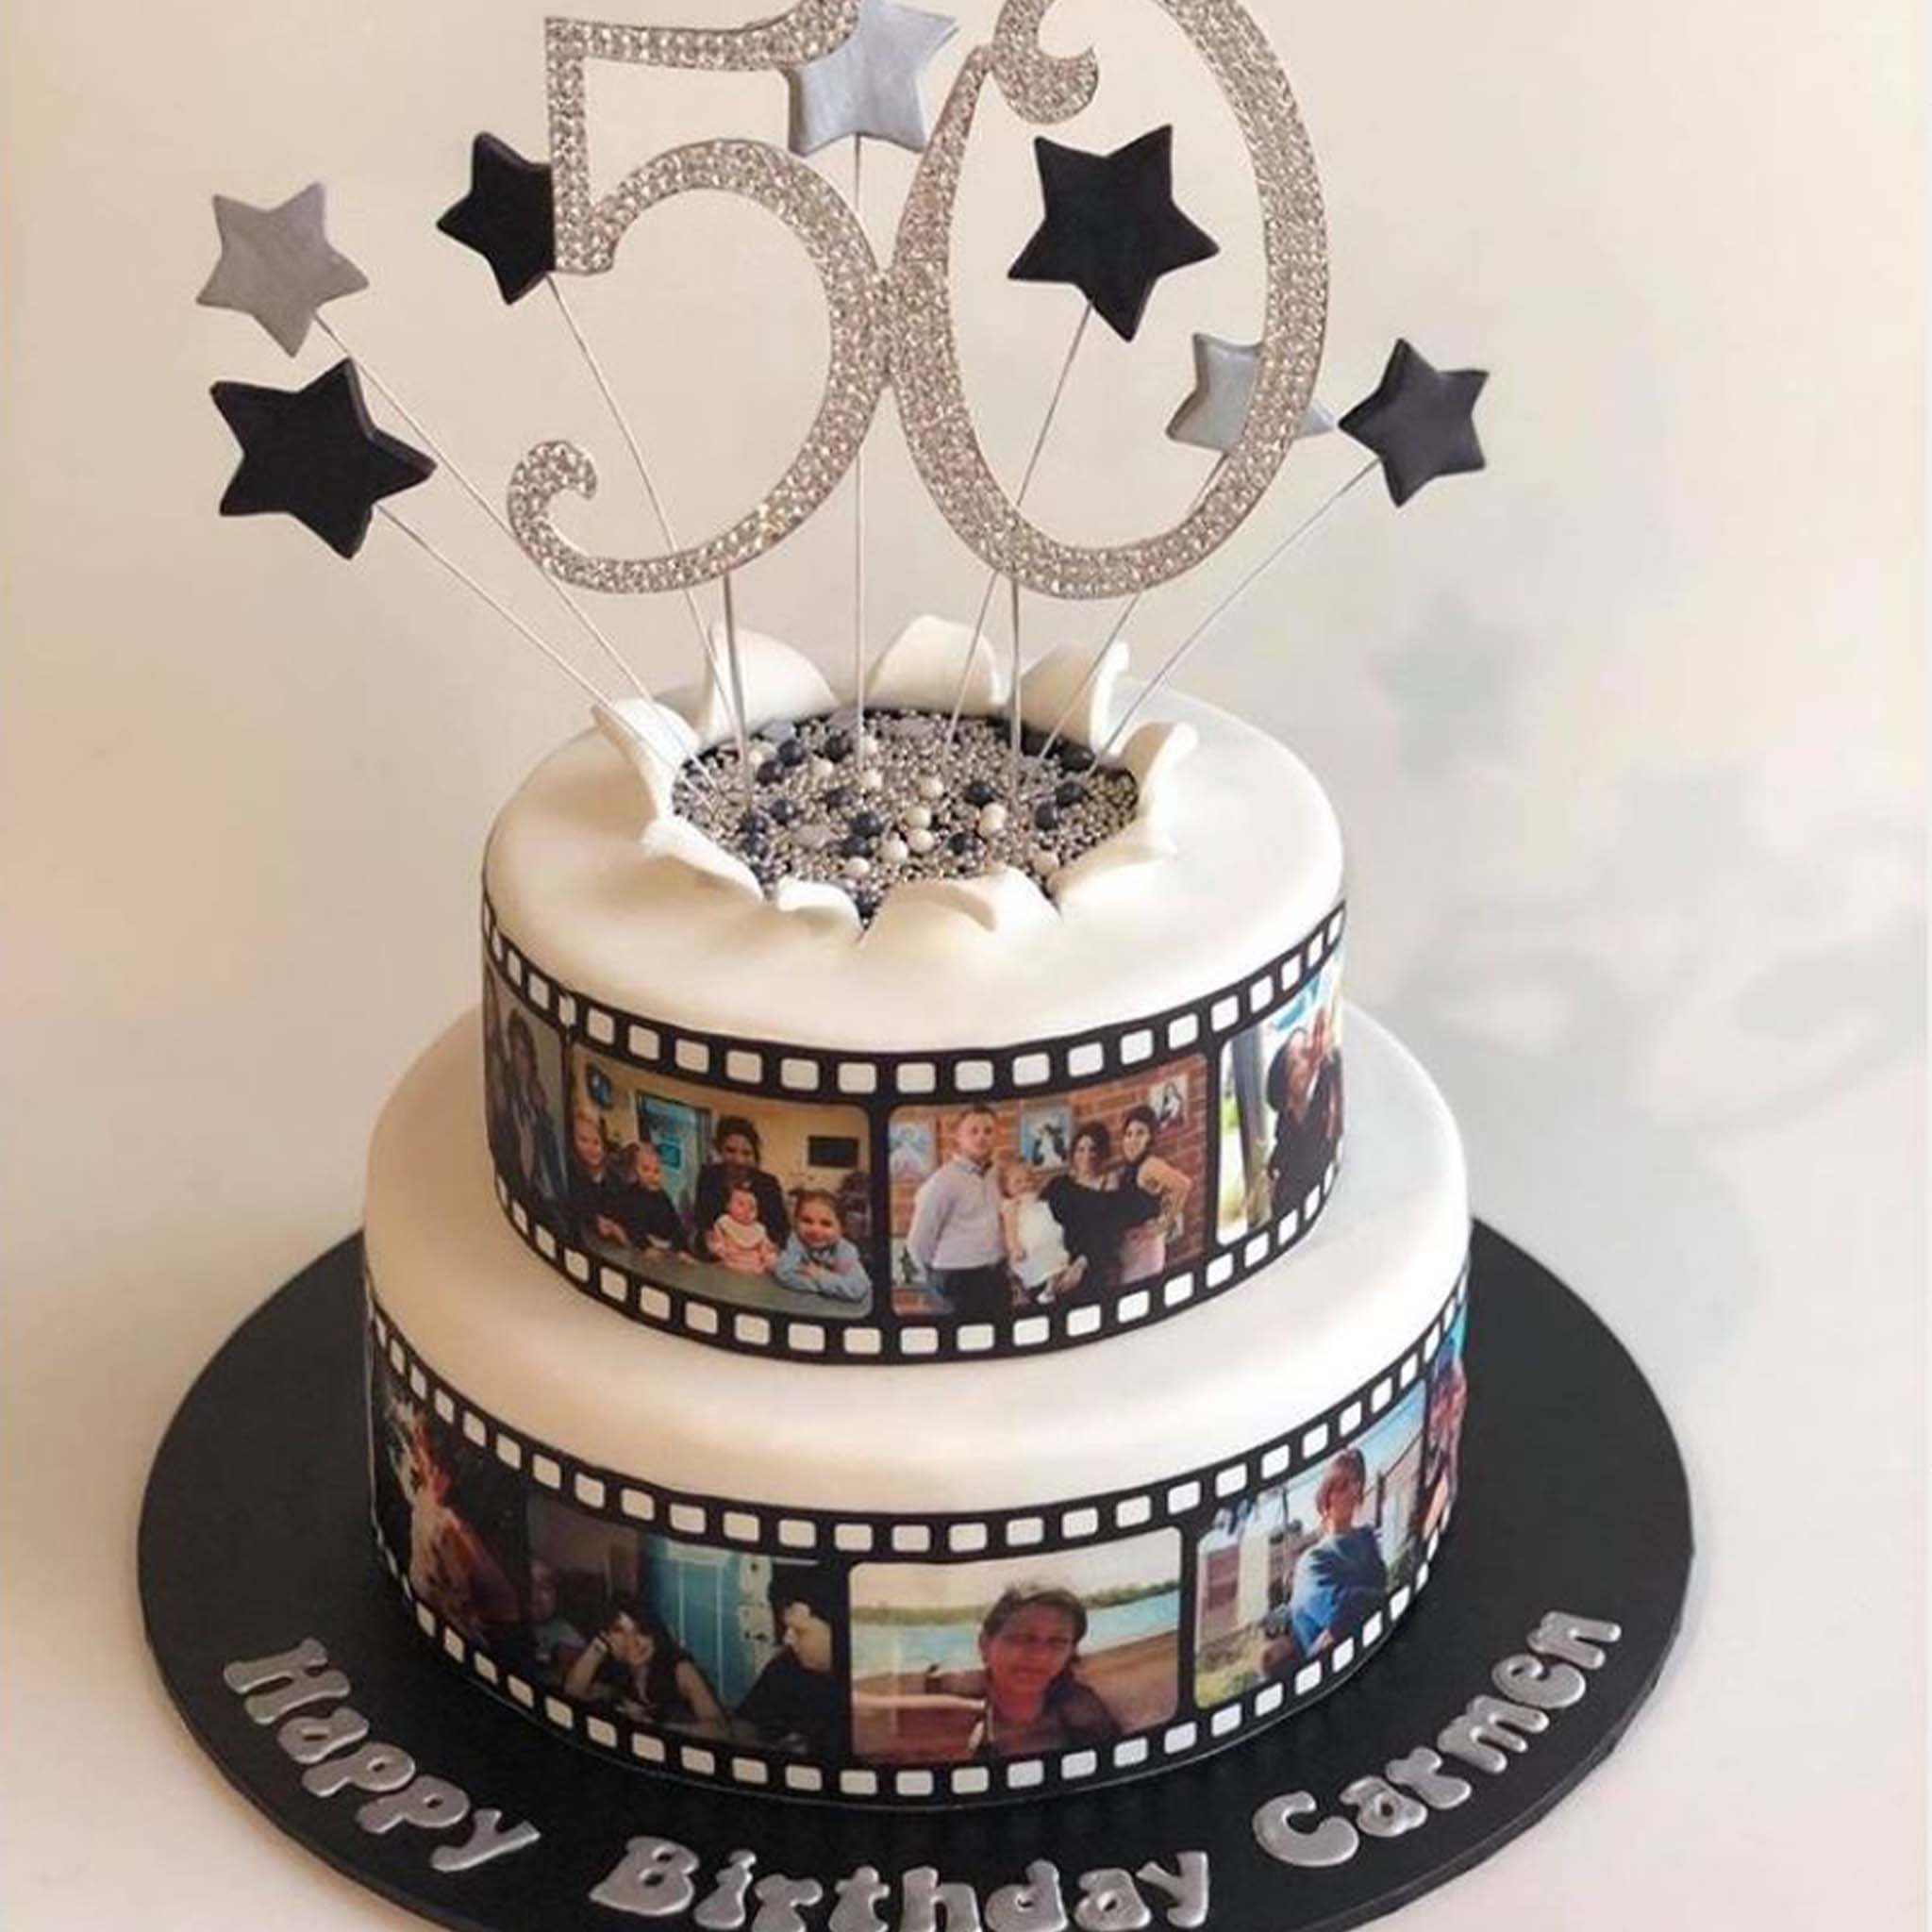 Photo Cakes, Order Online & Enjoy Your Perfect Picture Cake